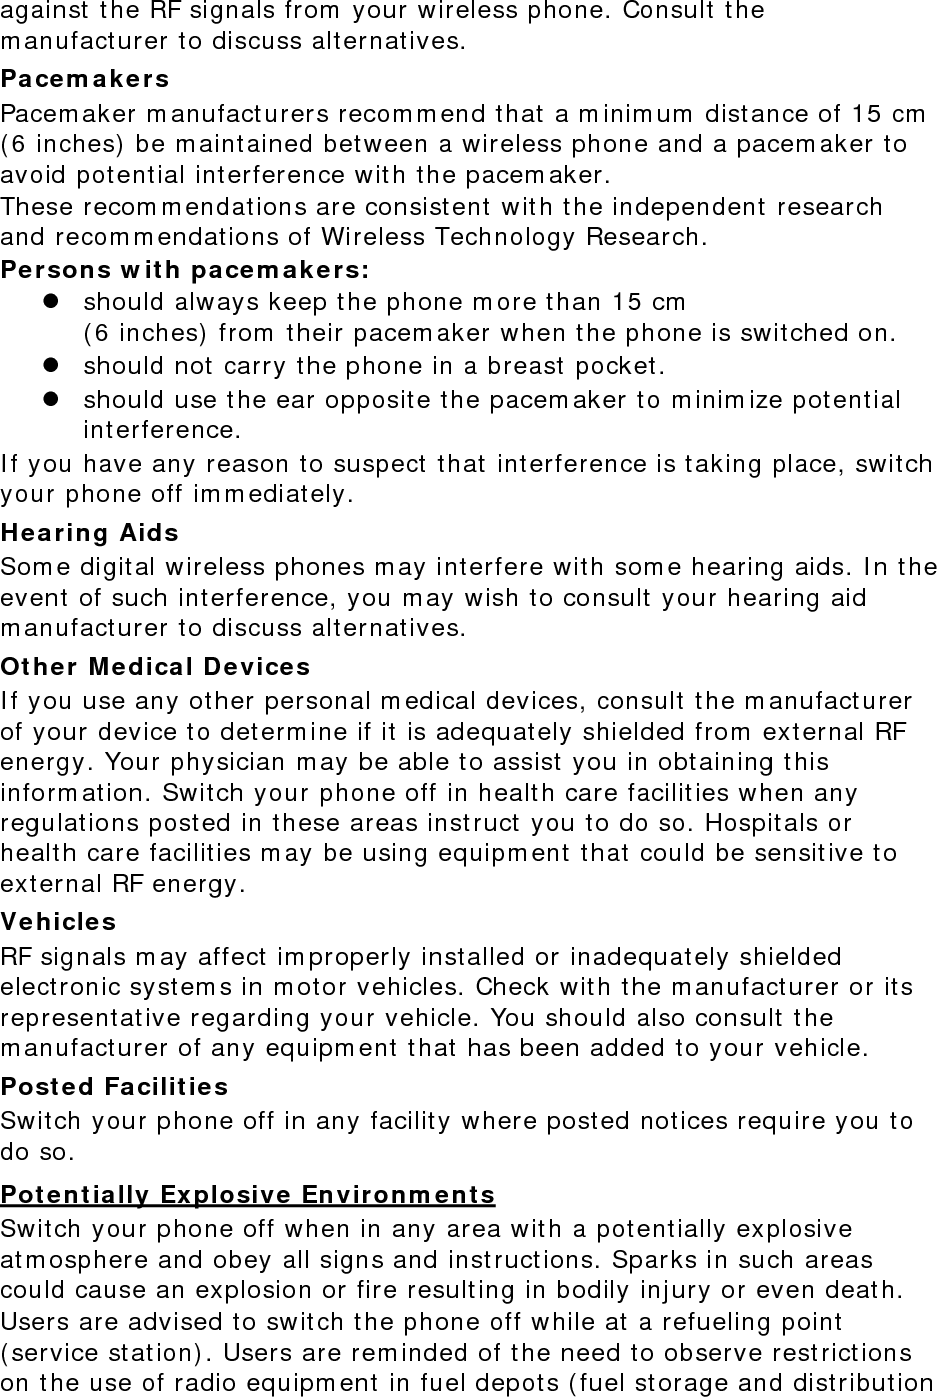 against the RF signals from your wireless phone. Consult the manufacturer to discuss alternatives. Pacemakers Pacemaker manufacturers recommend that a minimum distance of 15 cm (6 inches) be maintained between a wireless phone and a pacemaker to avoid potential interference with the pacemaker. These recommendations are consistent with the independent research and recommendations of Wireless Technology Research. Persons with pacemakers:  should always keep the phone more than 15 cm  (6 inches) from their pacemaker when the phone is switched on.  should not carry the phone in a breast pocket.  should use the ear opposite the pacemaker to minimize potential interference. If you have any reason to suspect that interference is taking place, switch your phone off immediately. Hearing Aids Some digital wireless phones may interfere with some hearing aids. In the event of such interference, you may wish to consult your hearing aid manufacturer to discuss alternatives. Other Medical Devices If you use any other personal medical devices, consult the manufacturer of your device to determine if it is adequately shielded from external RF energy. Your physician may be able to assist you in obtaining this information. Switch your phone off in health care facilities when any regulations posted in these areas instruct you to do so. Hospitals or health care facilities may be using equipment that could be sensitive to external RF energy. Vehicles RF signals may affect improperly installed or inadequately shielded electronic systems in motor vehicles. Check with the manufacturer or its representative regarding your vehicle. You should also consult the manufacturer of any equipment that has been added to your vehicle. Posted Facilities Switch your phone off in any facility where posted notices require you to do so. Potentially Explosive Environments Switch your phone off when in any area with a potentially explosive atmosphere and obey all signs and instructions. Sparks in such areas could cause an explosion or fire resulting in bodily injury or even death. Users are advised to switch the phone off while at a refueling point (service station). Users are reminded of the need to observe restrictions on the use of radio equipment in fuel depots (fuel storage and distribution 